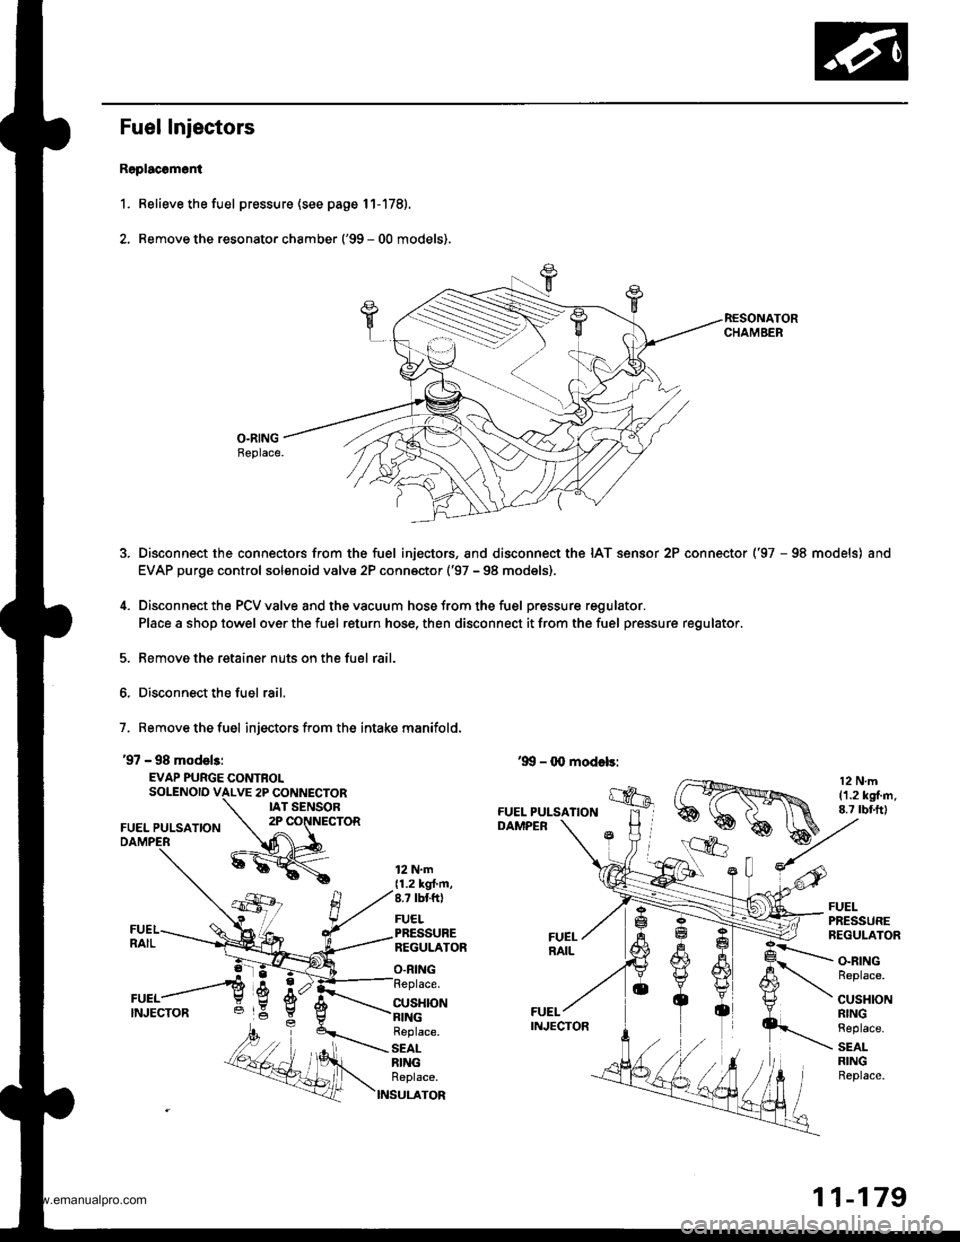 HONDA CR-V 1998 RD1-RD3 / 1.G Owners Manual 
Fuel Injectors
R6placomoni
1. Relieve the fuel pressure (see page 11-178).
2. Remove the resonato. chamber (99 - 00 models).
O.RINGBeplace.
Disconnect the connectors from the fuel injectors, and dis